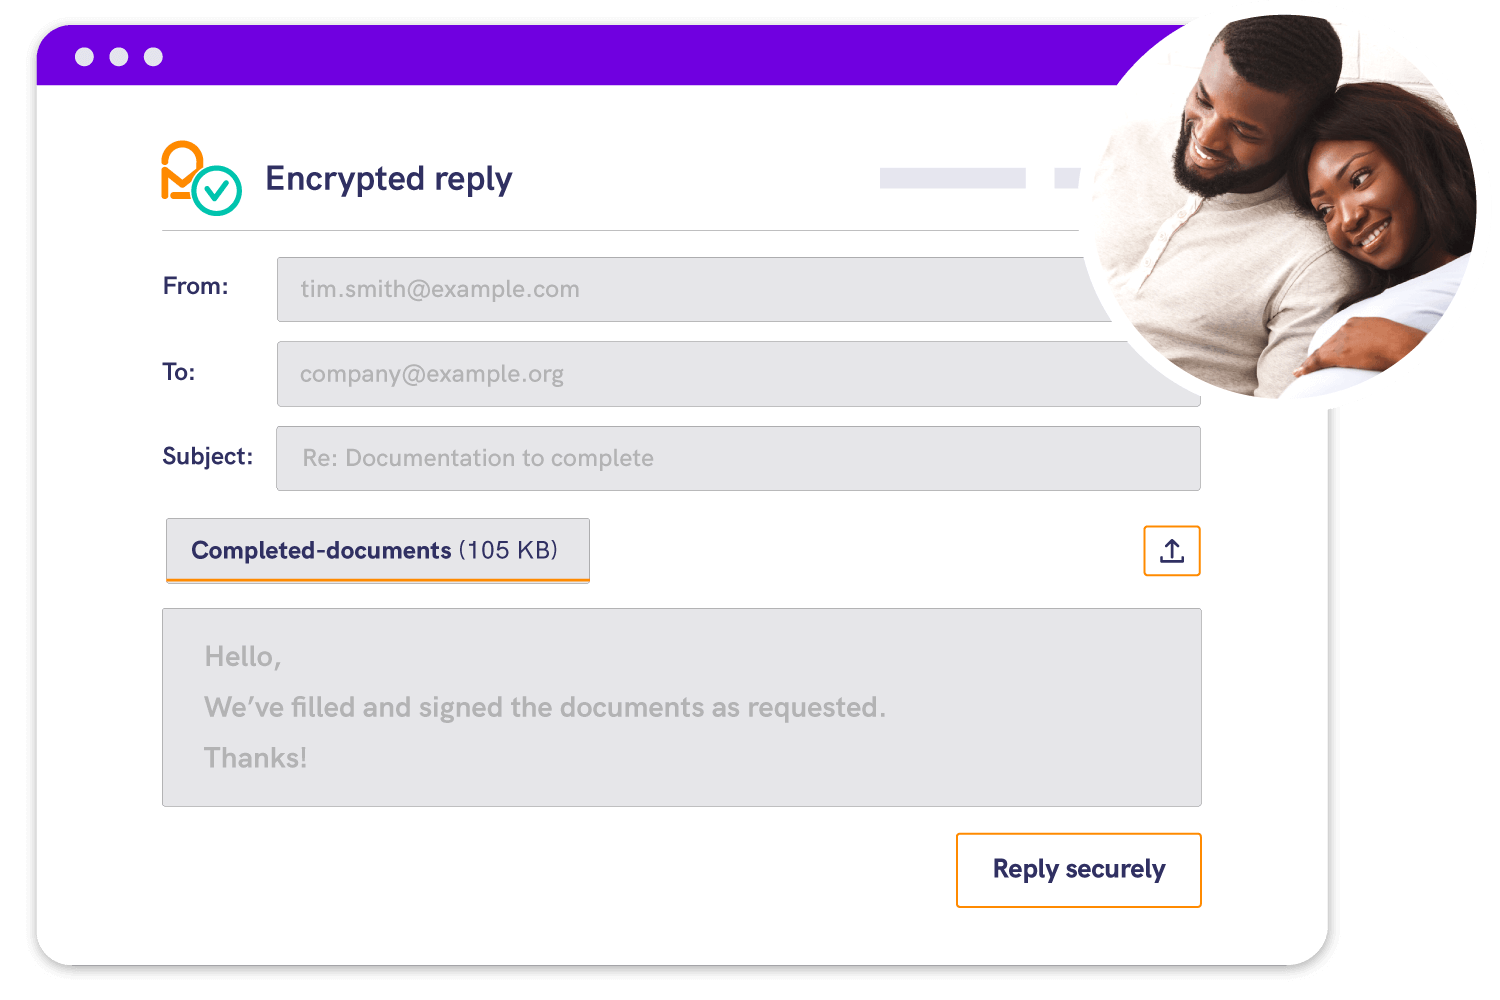 Customers sensing secure encrypted reply to Mailock email